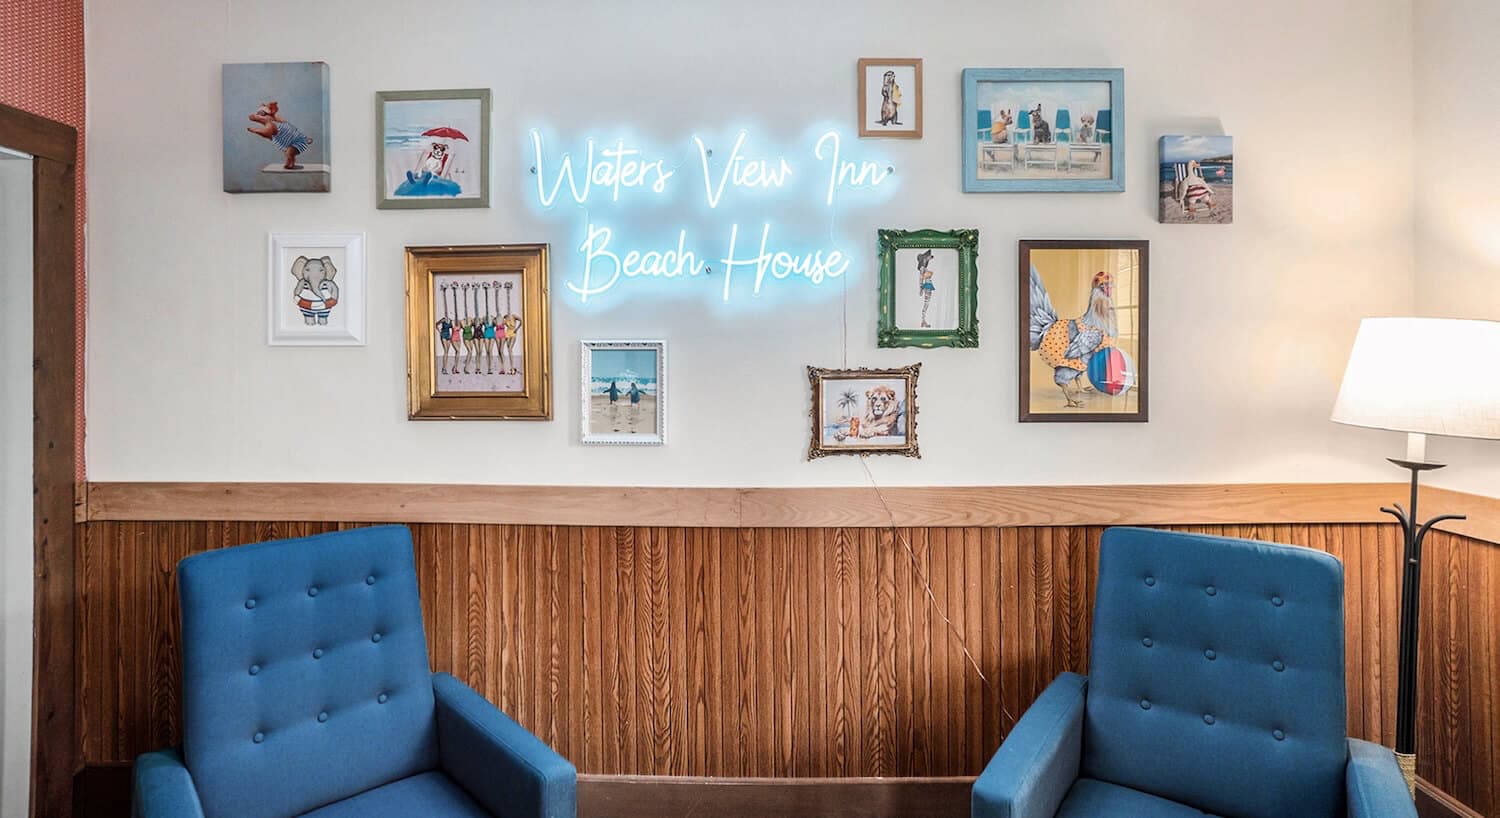 A sitting area with 2 blue armchairs along a wall with wood wainscotting, photos of animals on the wall, and a neon sign that says Waters View Inn Beach House.